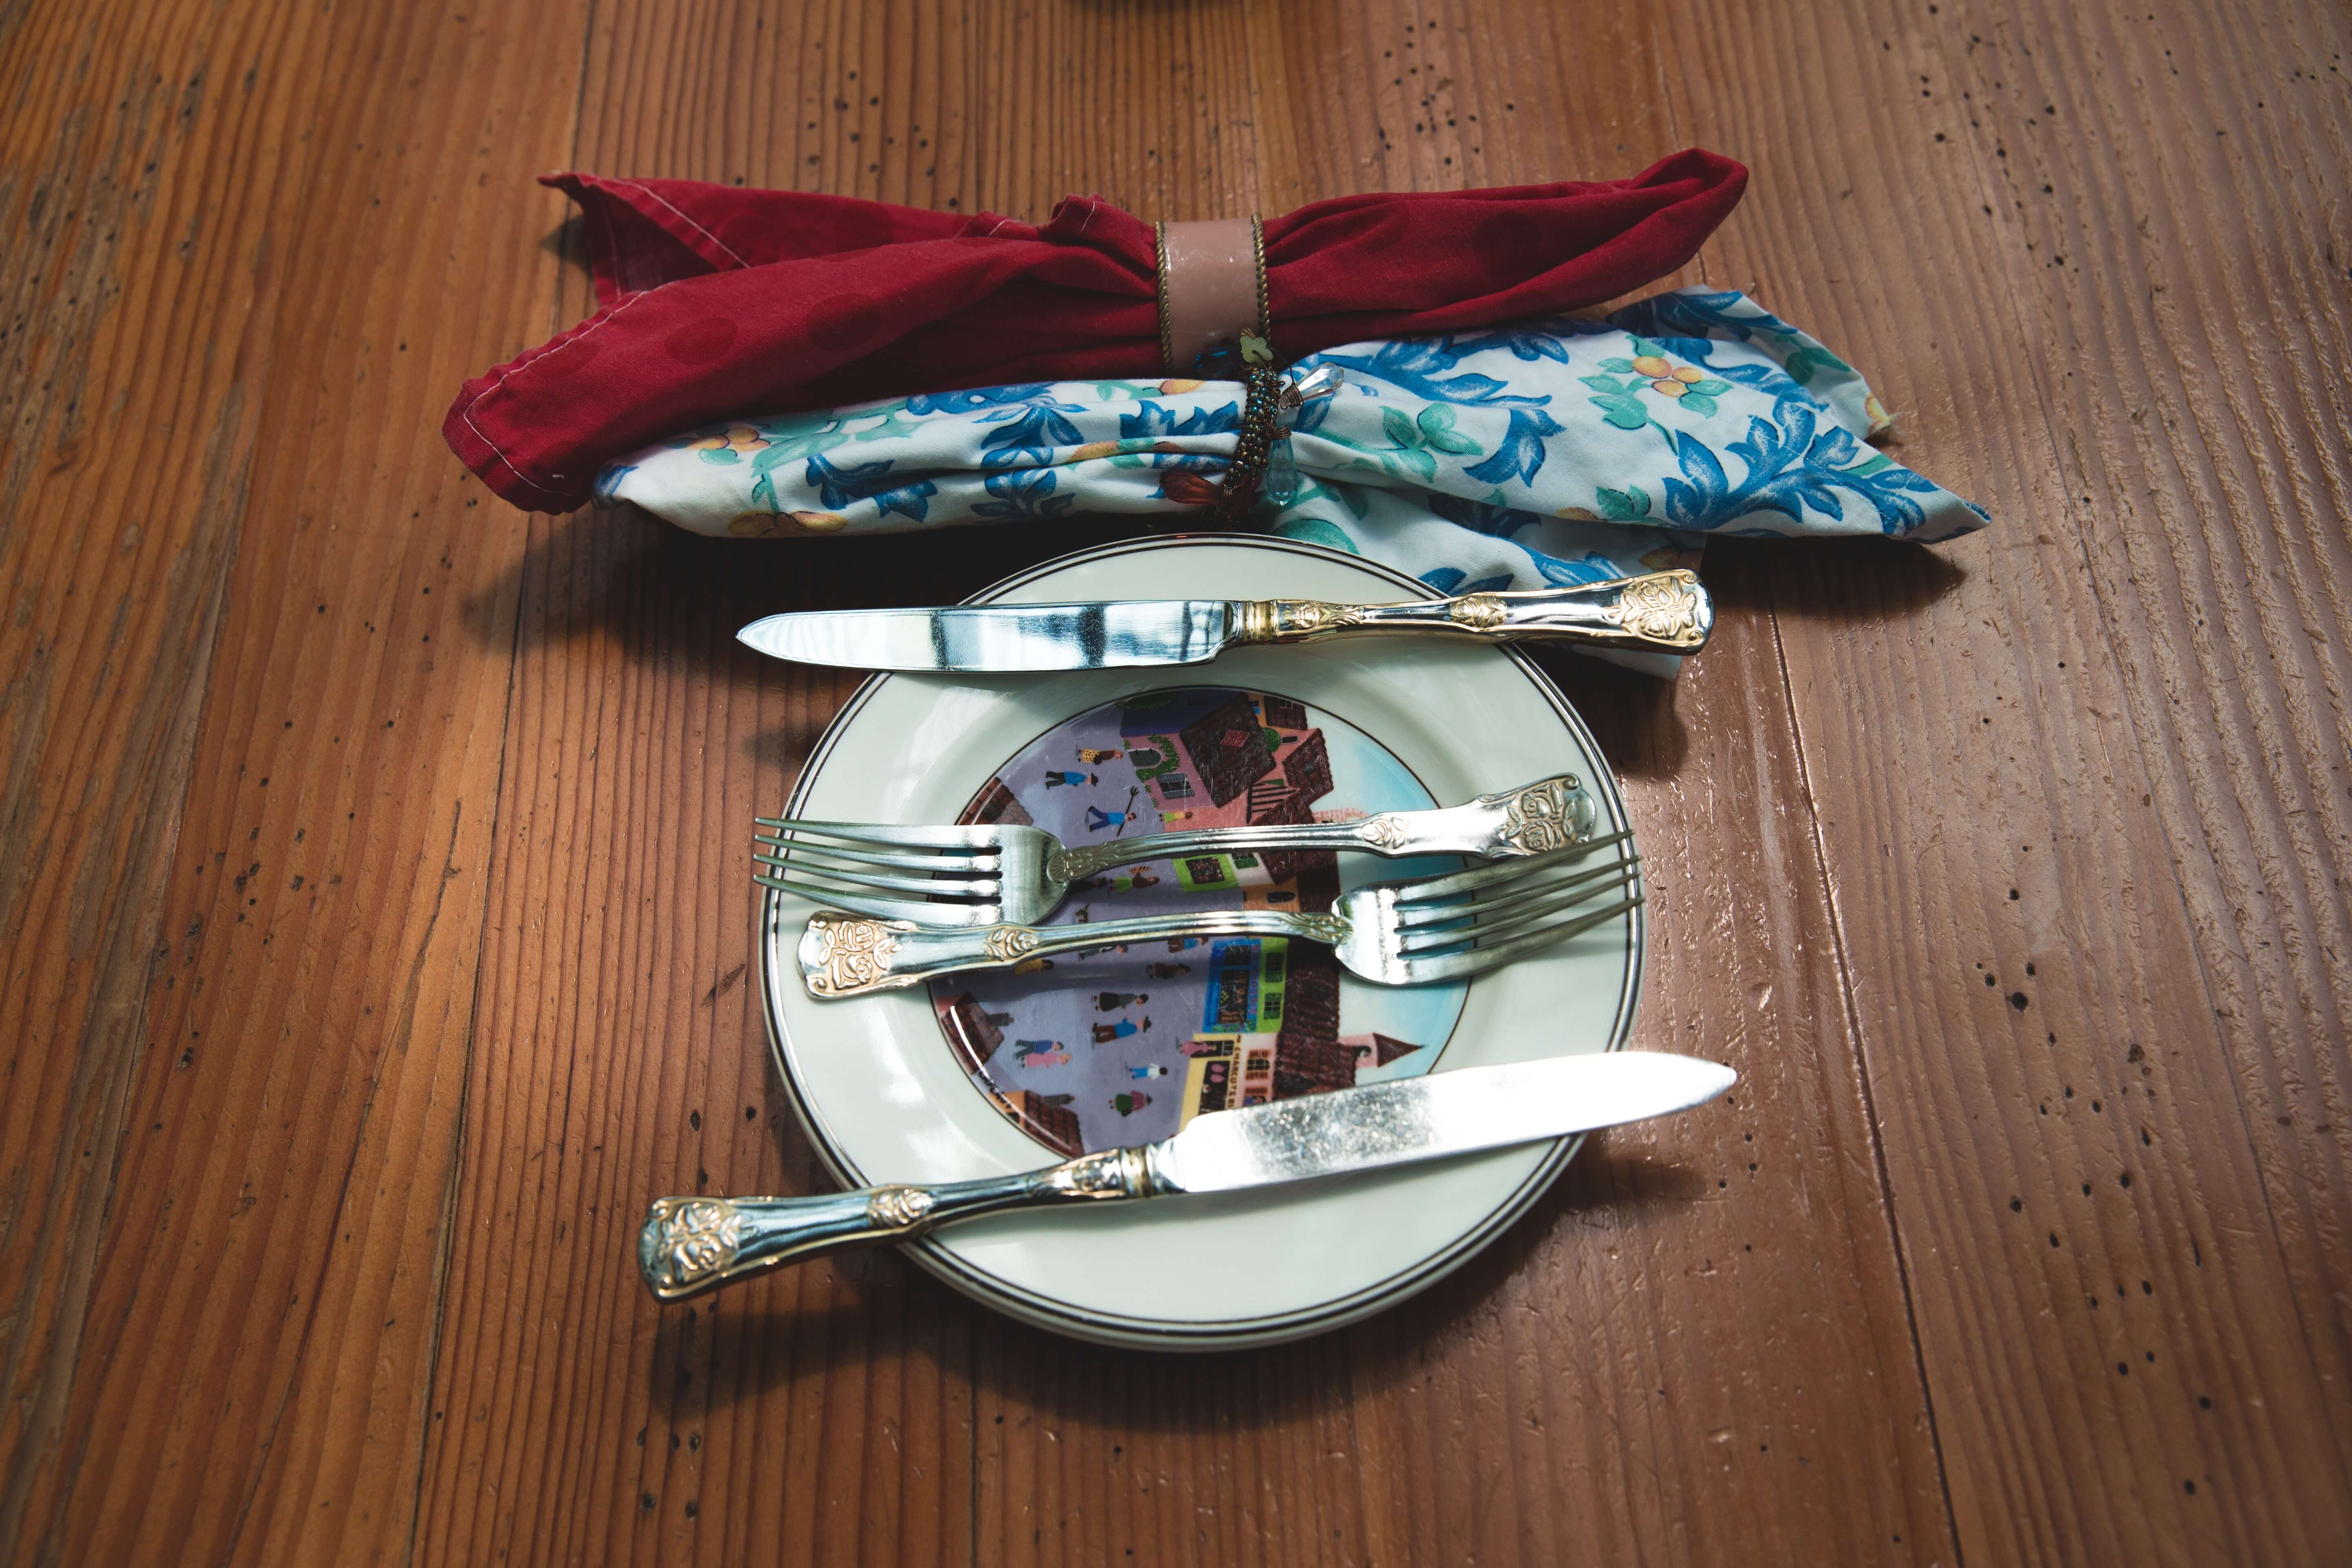 A dinner setting with two colorful cloth napkins